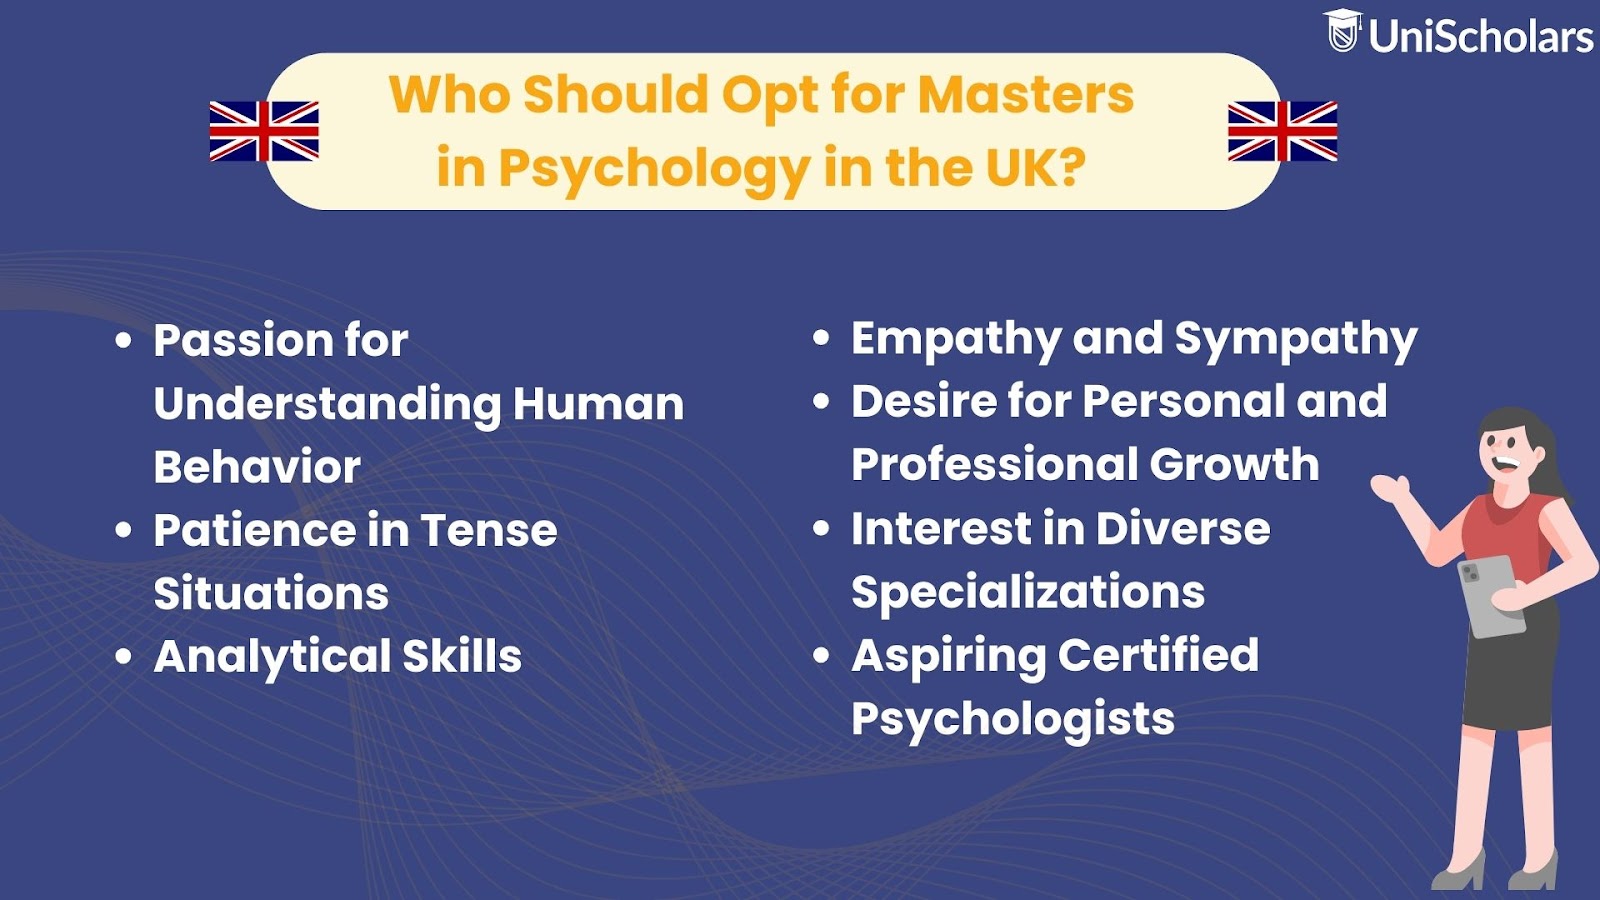 Who Should Opt for Masters in Psychology in UK